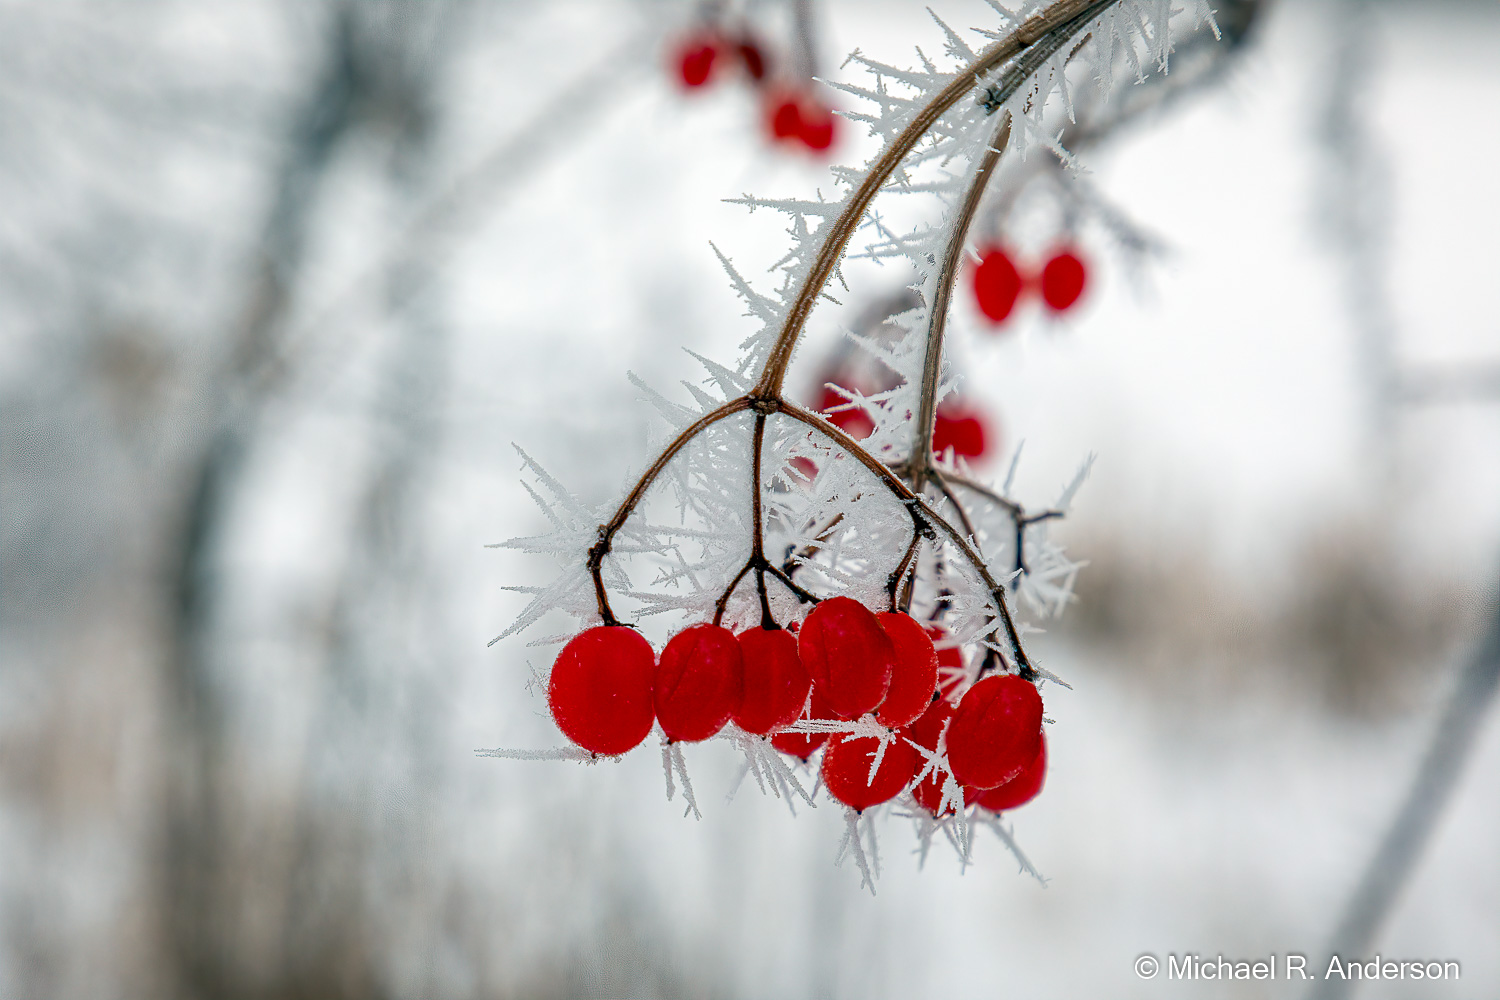 Red berries with rime ice